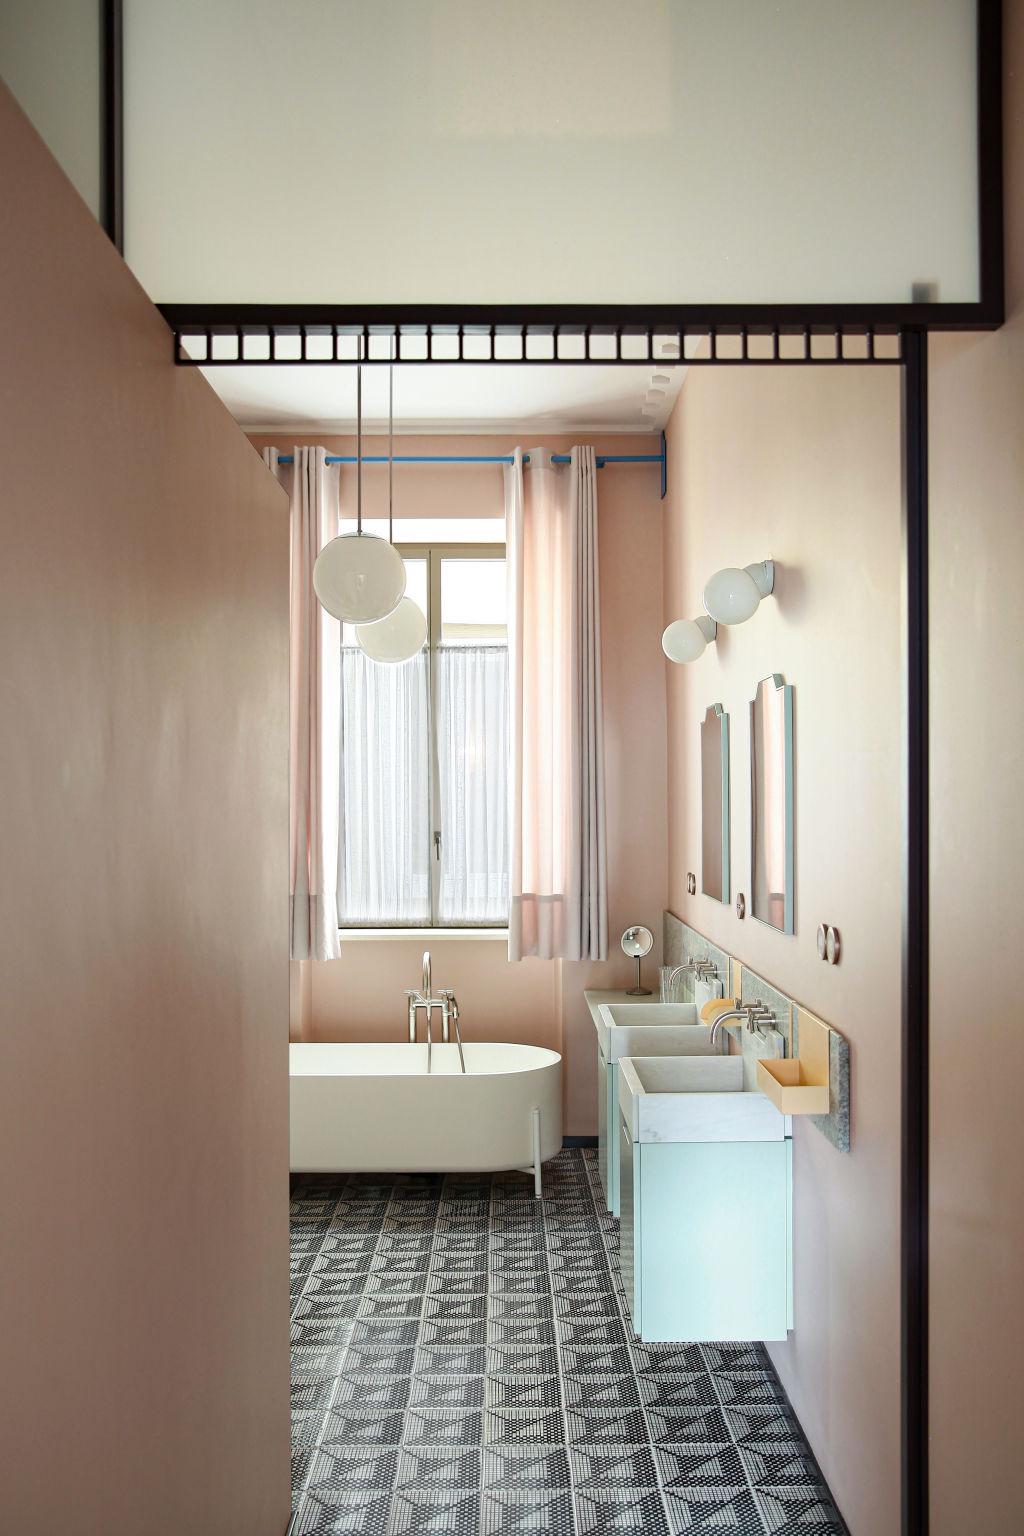 Pastel tones were used in the bathroom and bedrooms. Photo: Carola Ripamonti